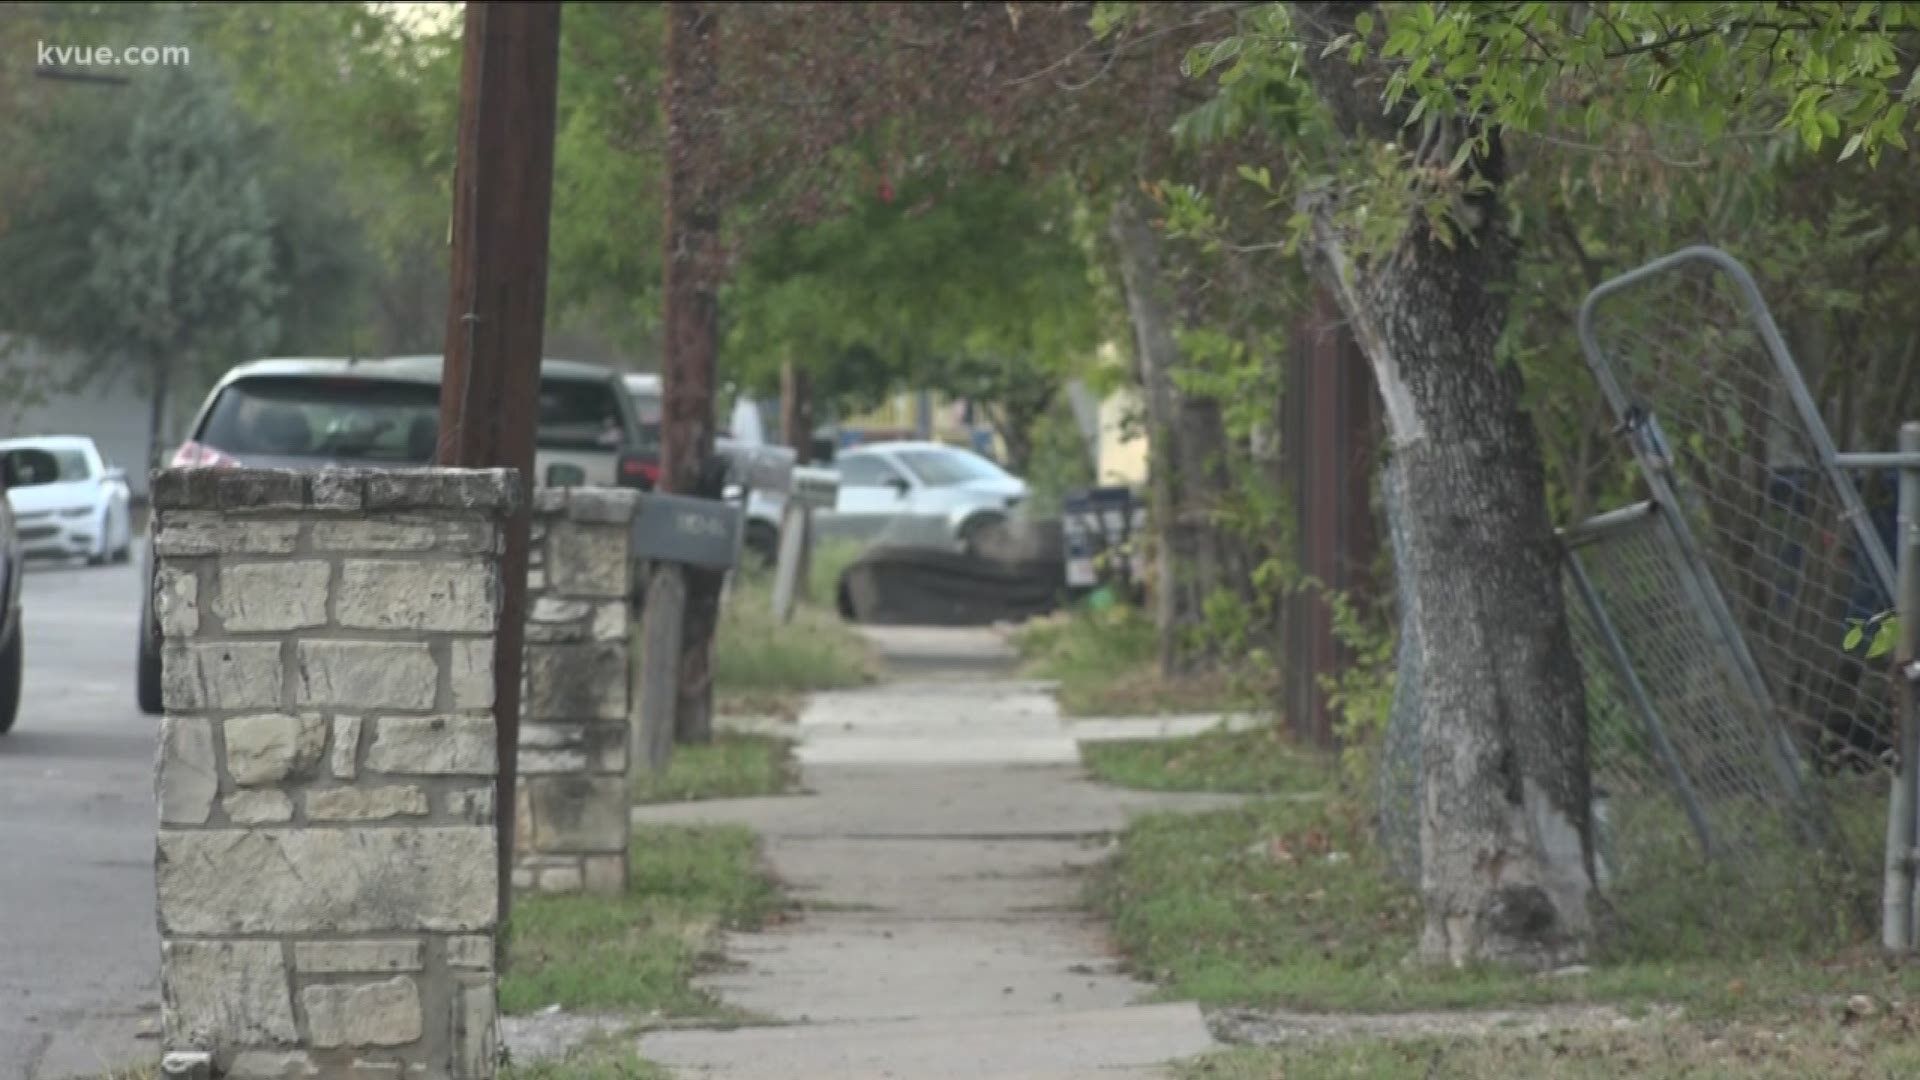 The Austin Justice Coalition and Huston-Tillotson University are working together to survey residents in neighborhoods deemed vulnerable to gentrification.